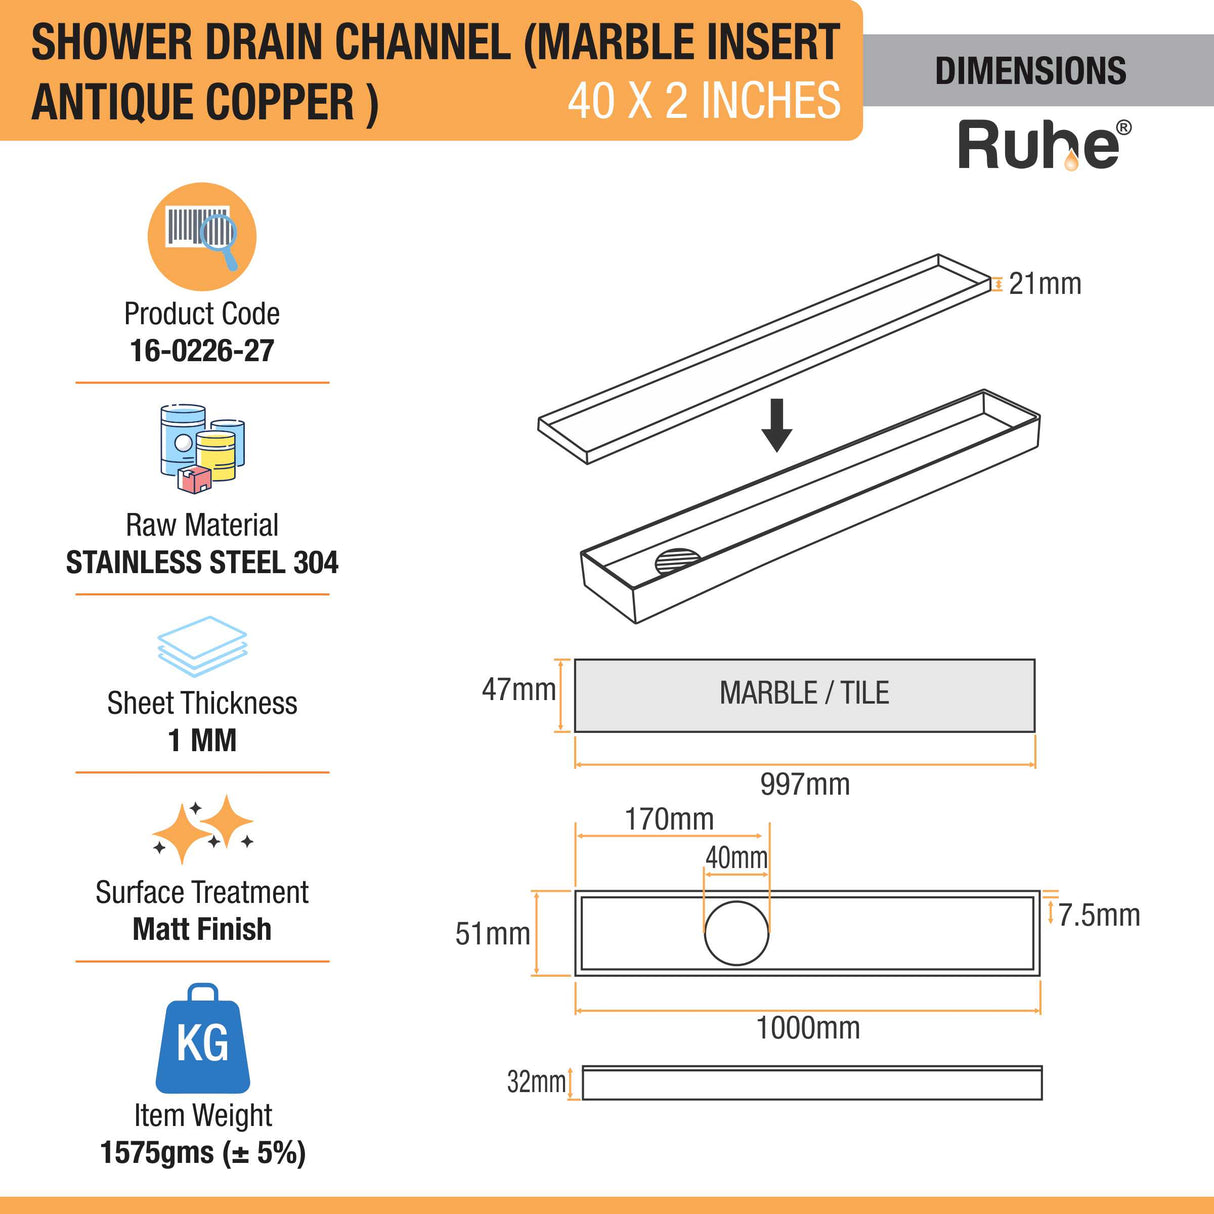 Marble Insert Shower Drain Channel (40 x 2 Inches) ANTIQUE COPPER dimensions and size